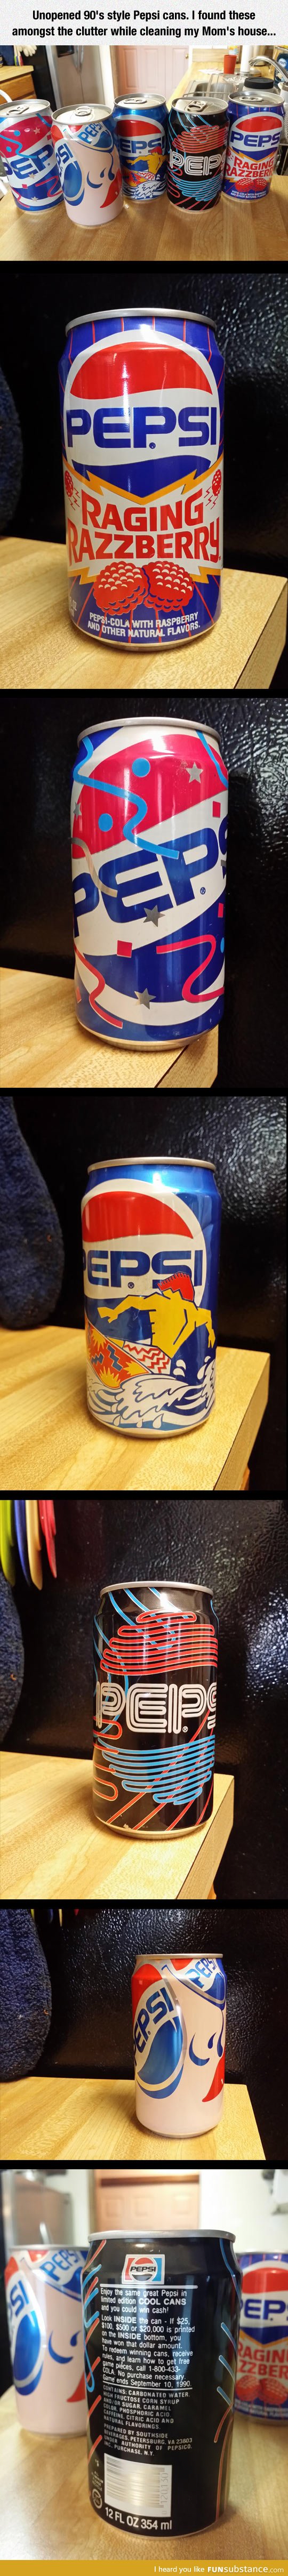 Unopened pepsi cans